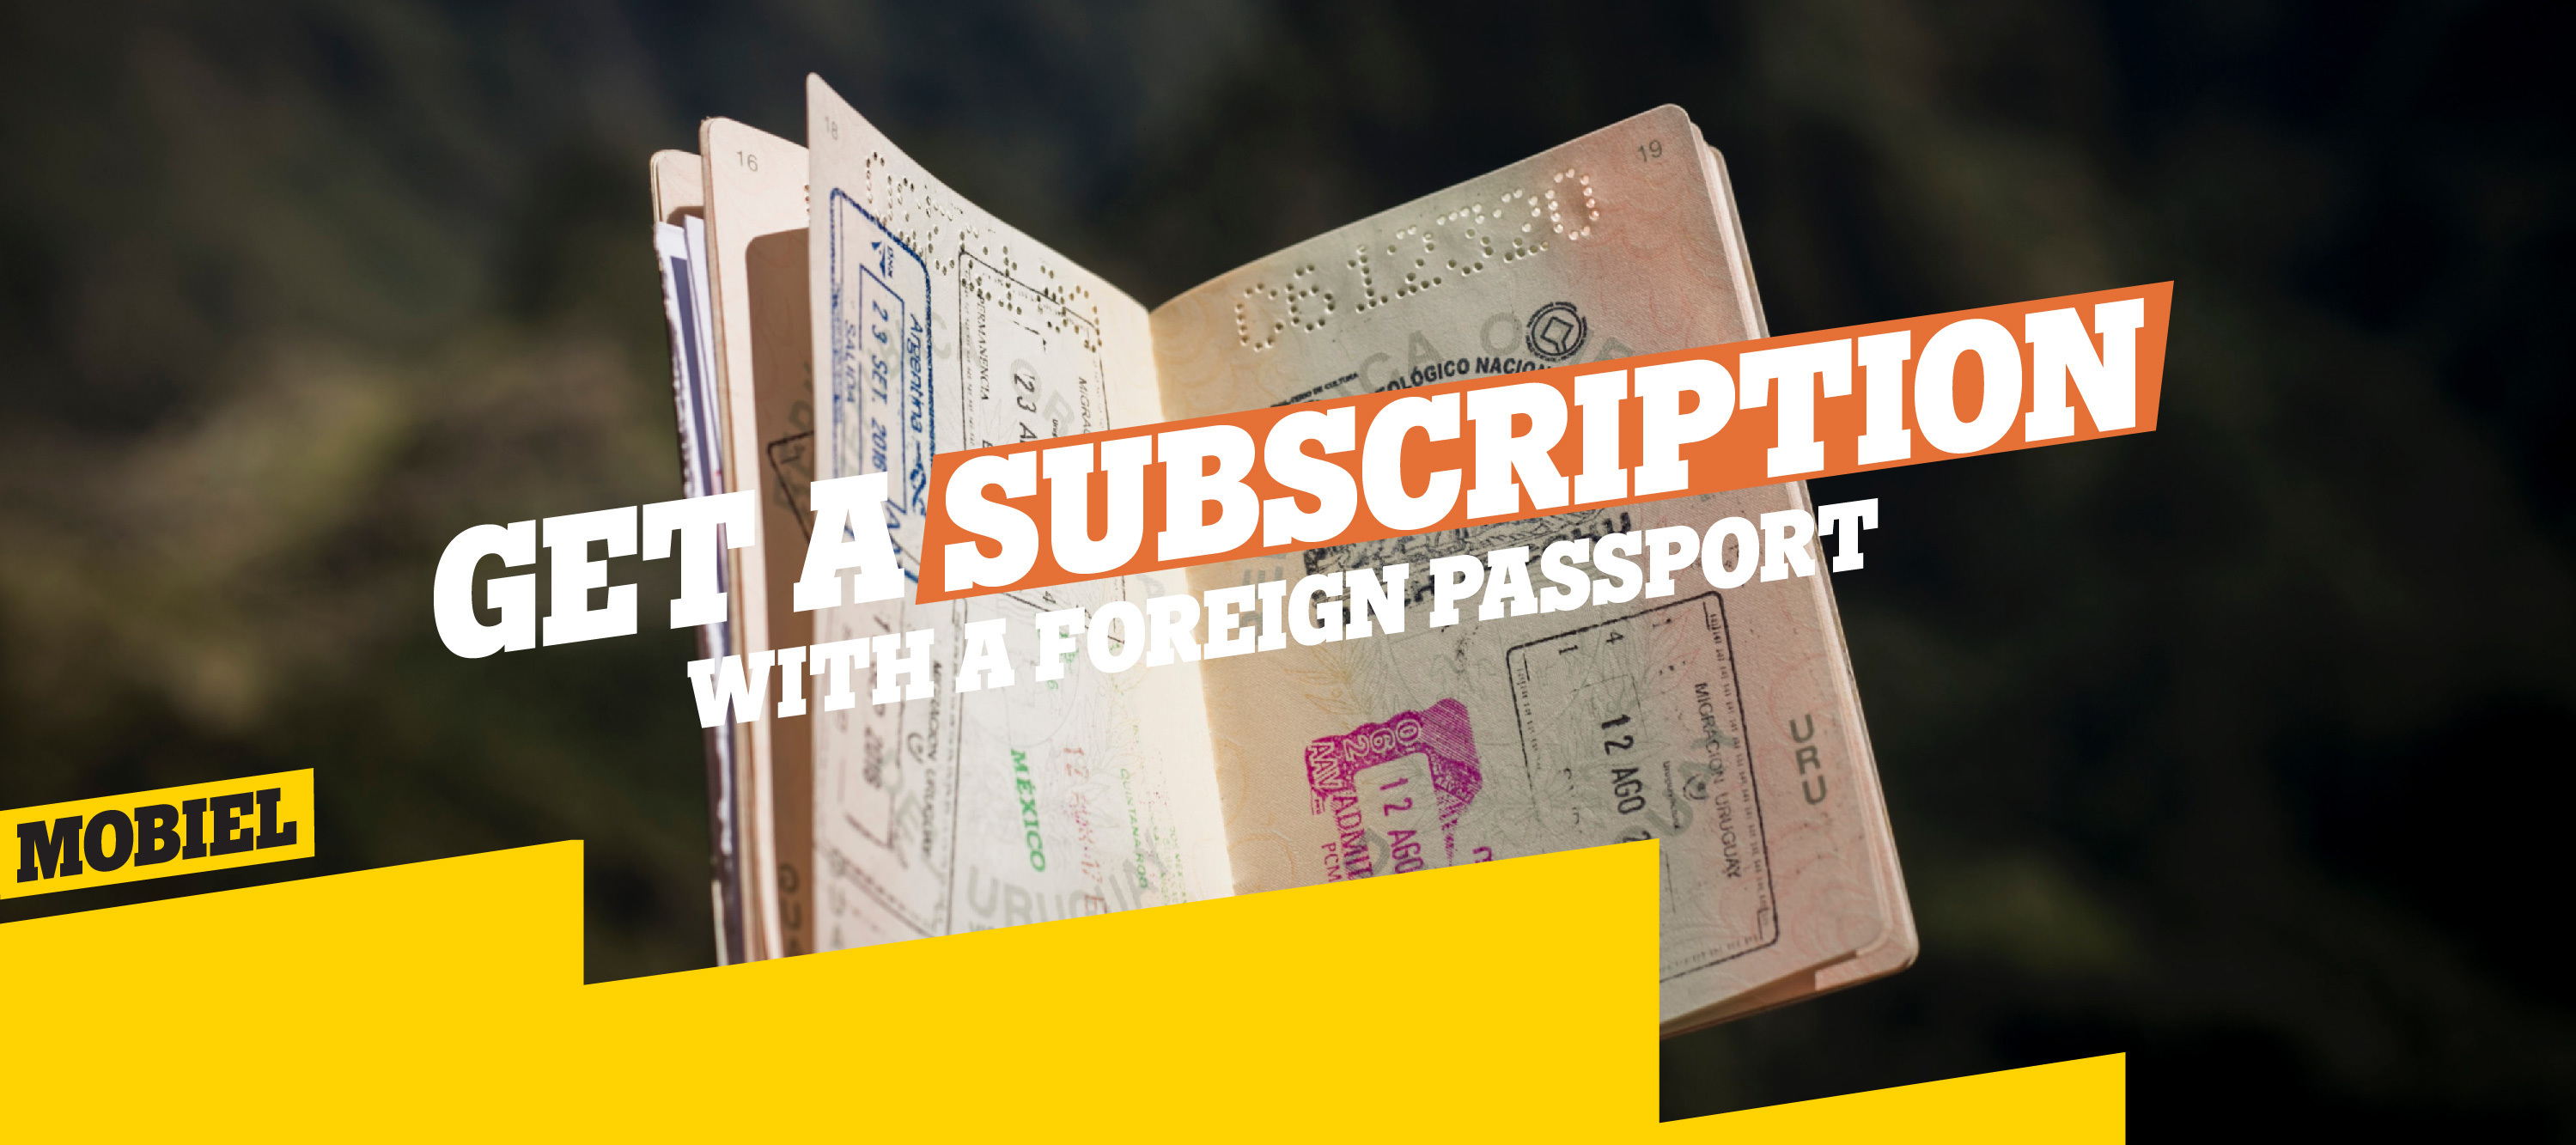 How can I get a Tele2 mobile subscription with a foreign passport?